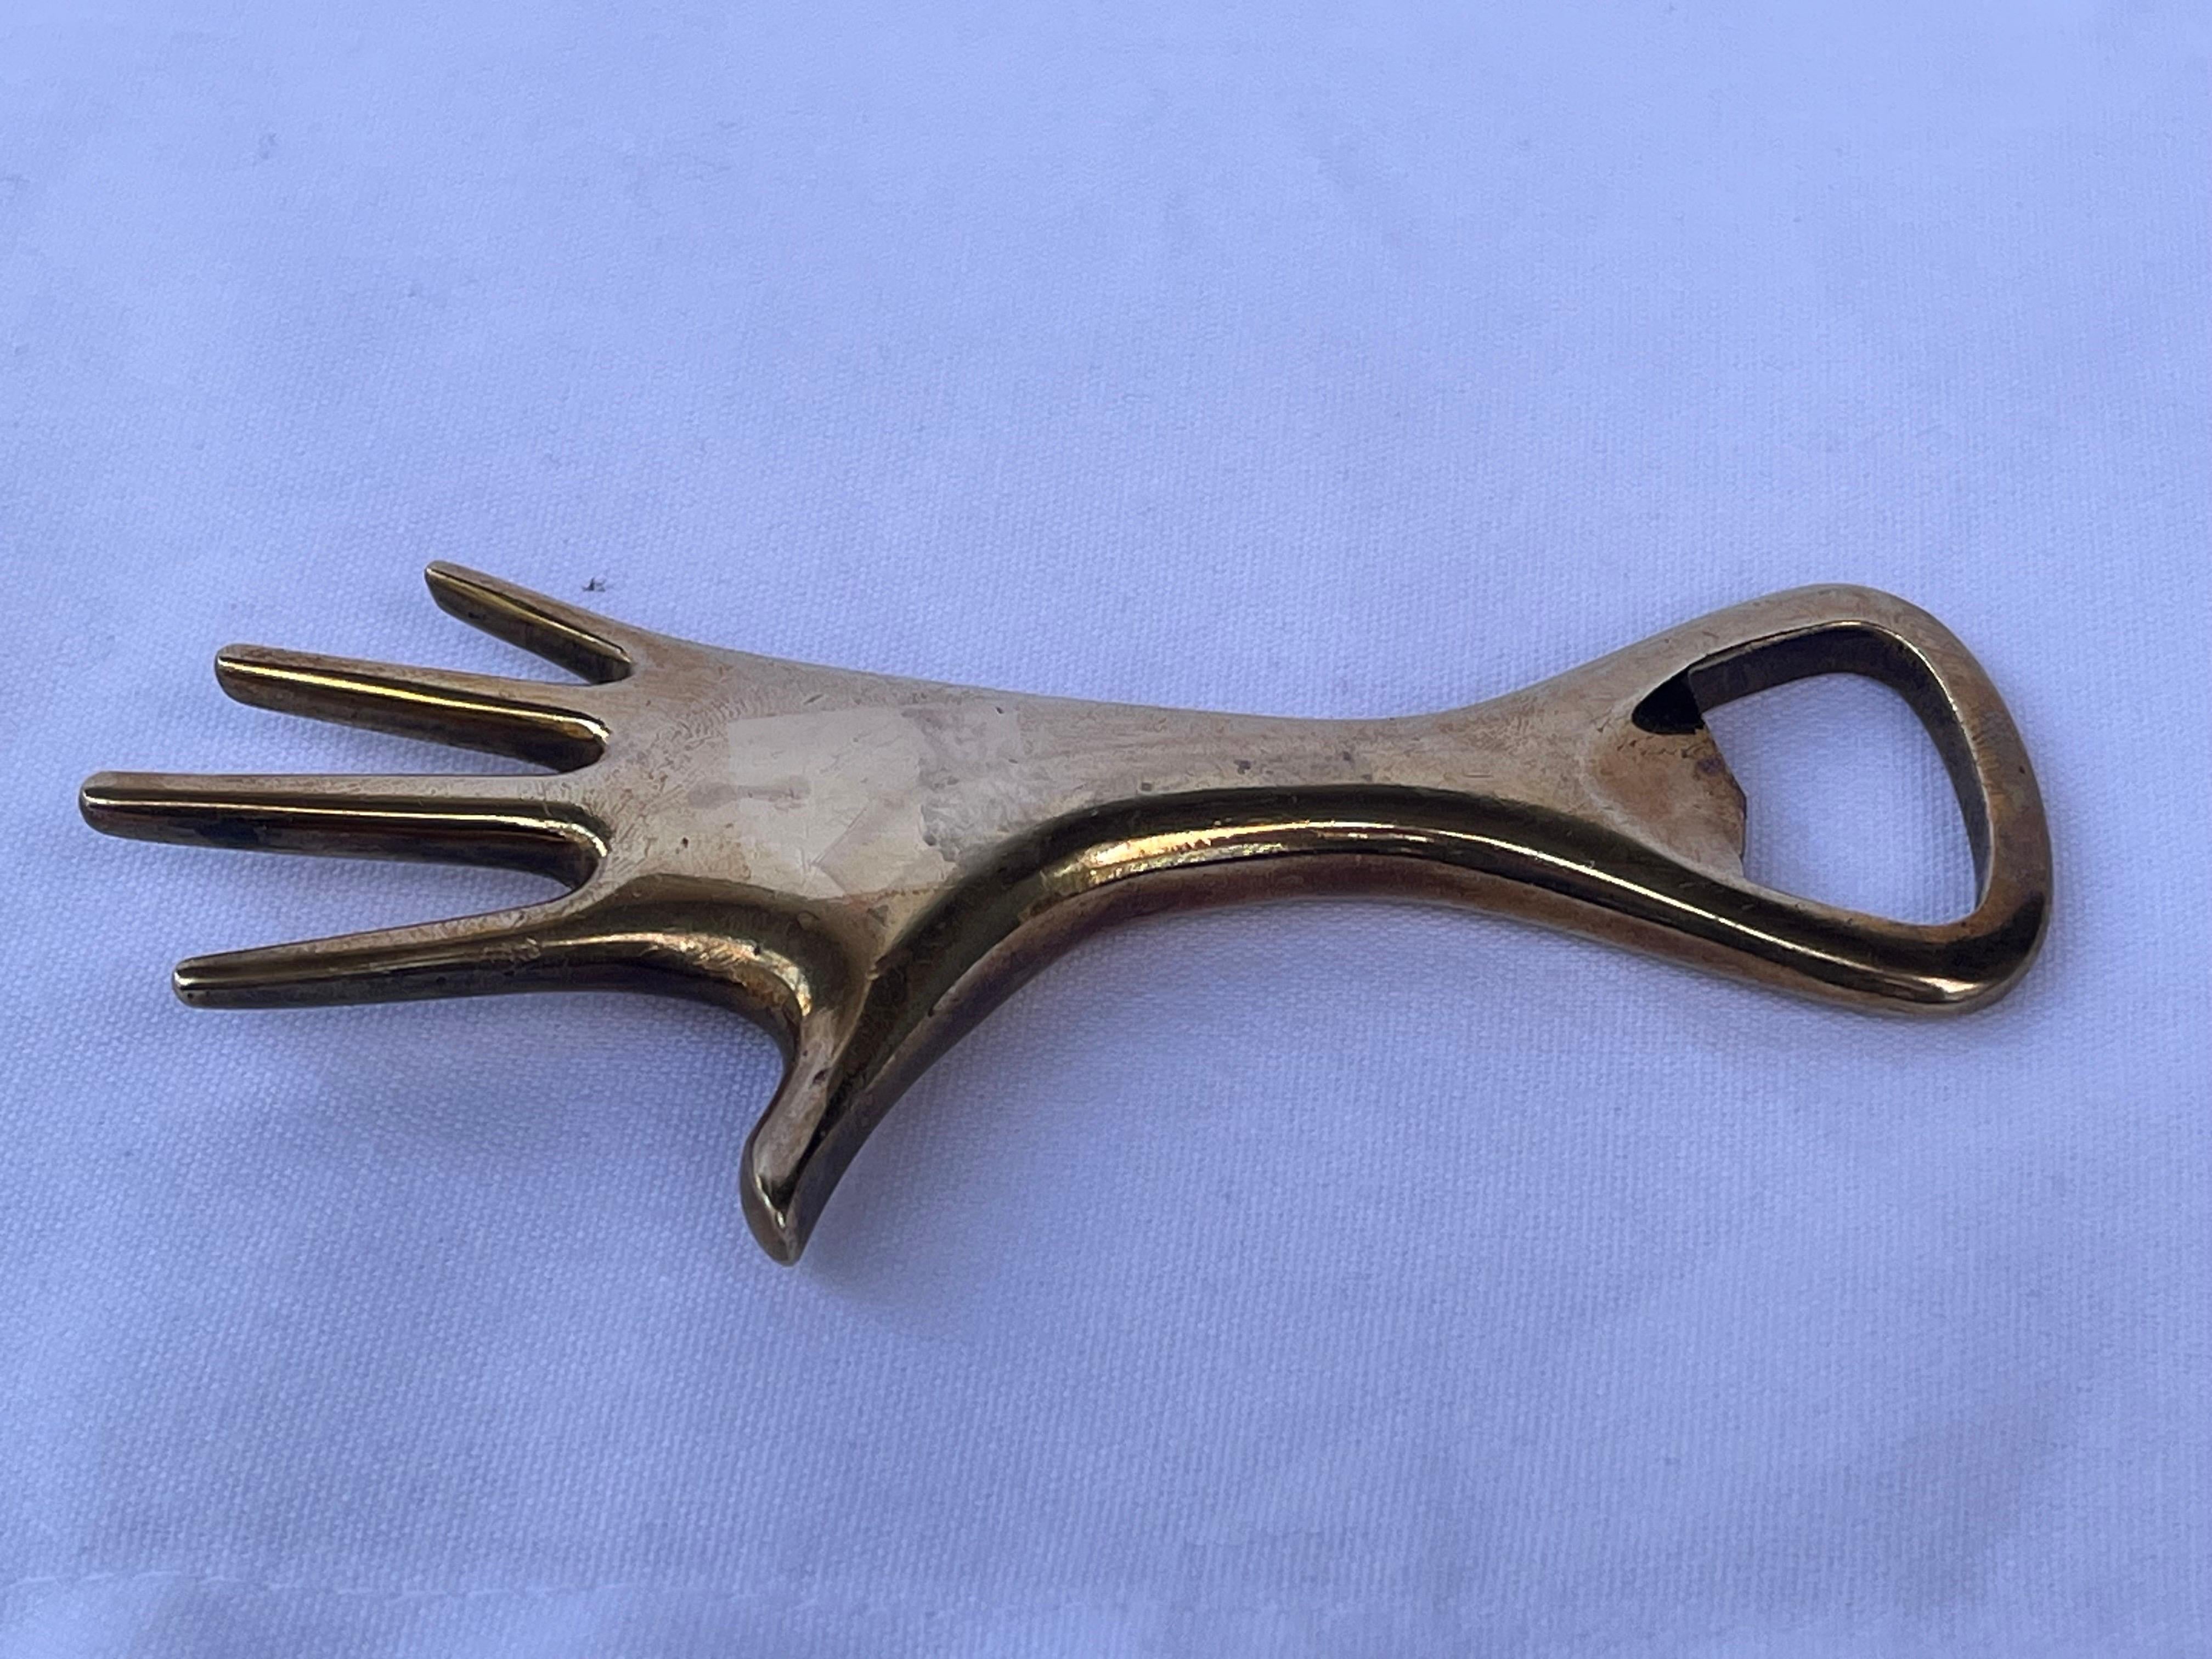 A vintage, mid century figural hand bottle opener designed by Carl Aubock and stamped Made In Austria. In vintage condition with a beautiful patina with the requisite nicks and marks indicating a life well lived and loved to this solid brass desk